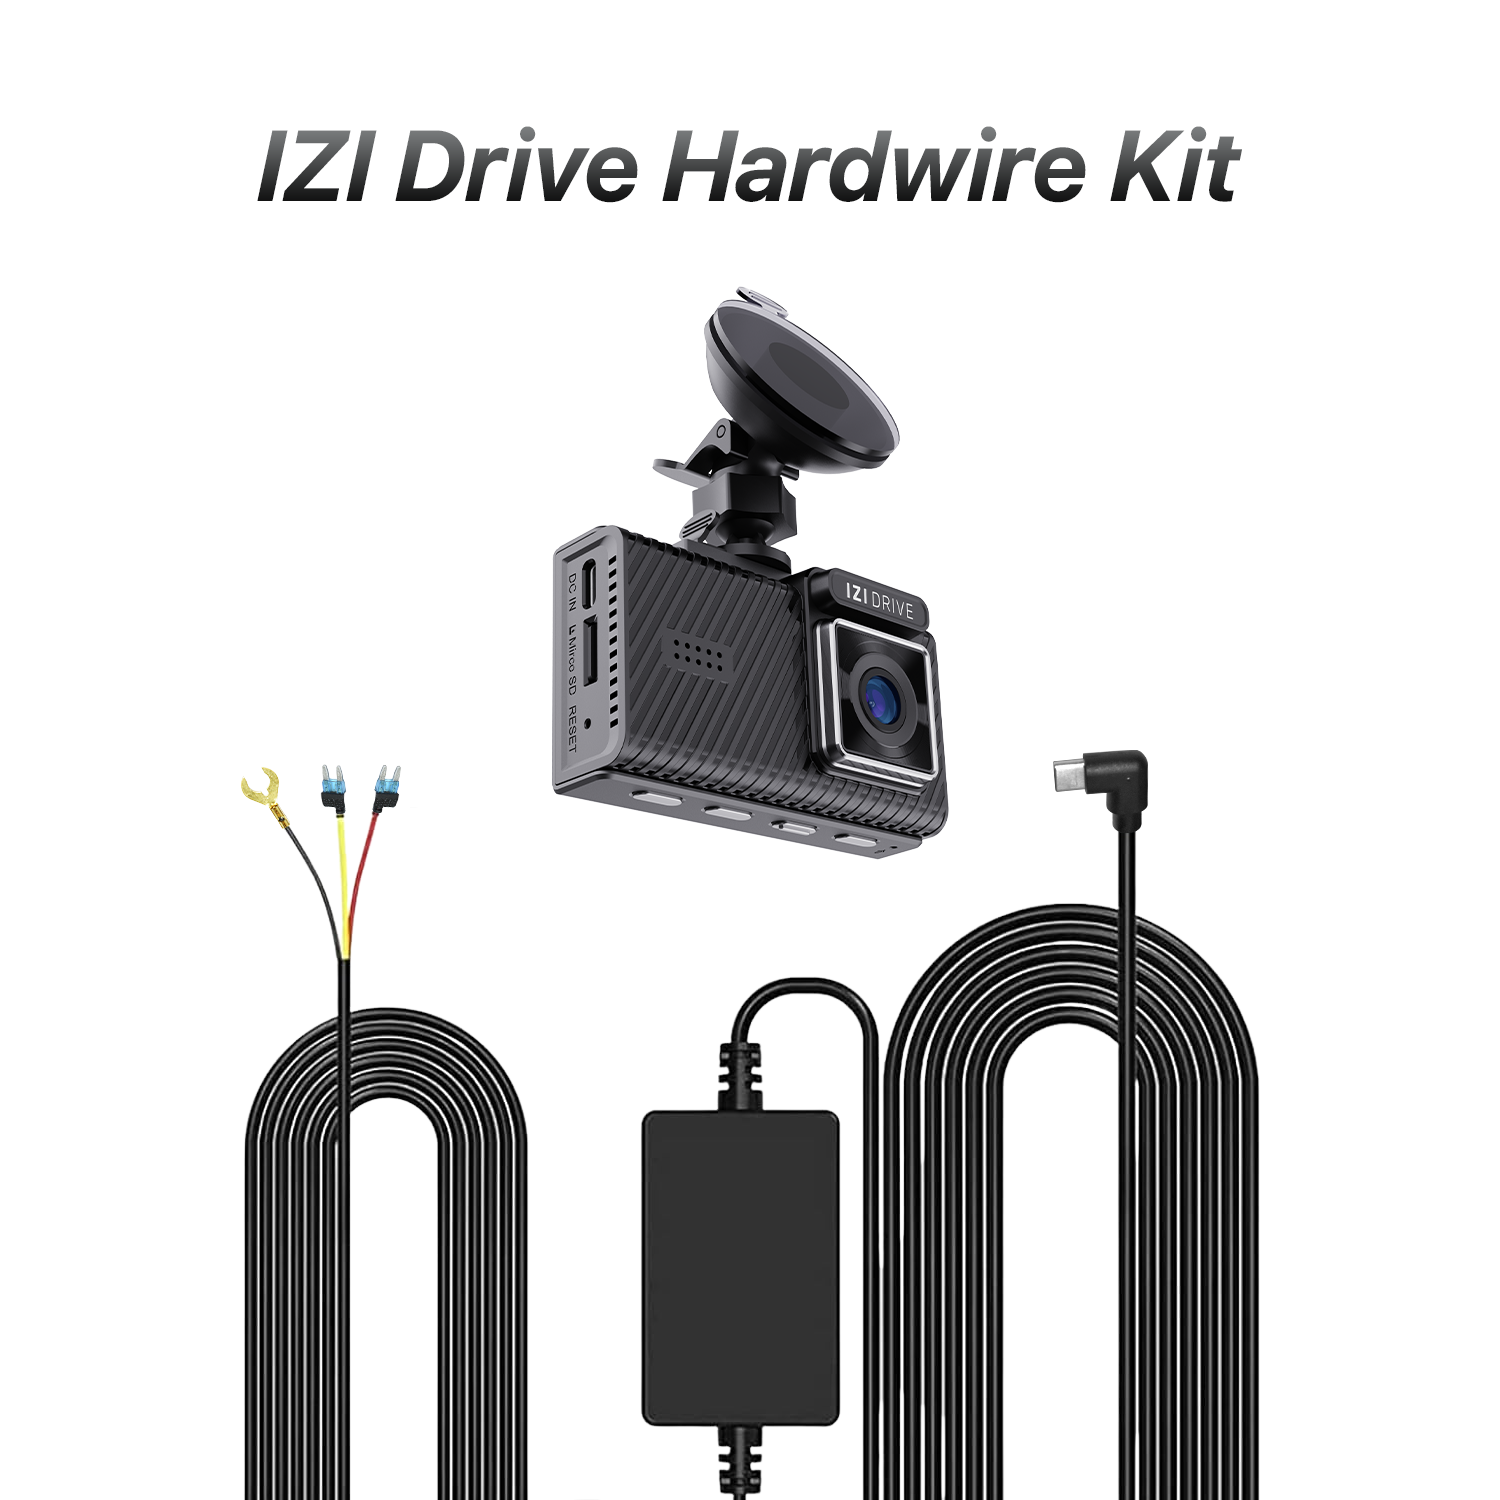 IZI DRIVE 4K Dash Camera with GPS, 3inch FHD Screen + IZI Drive Dash Cam USB Hardwire Cable Kit for 24 Hour Parking Monitoring Combo - izi-cart